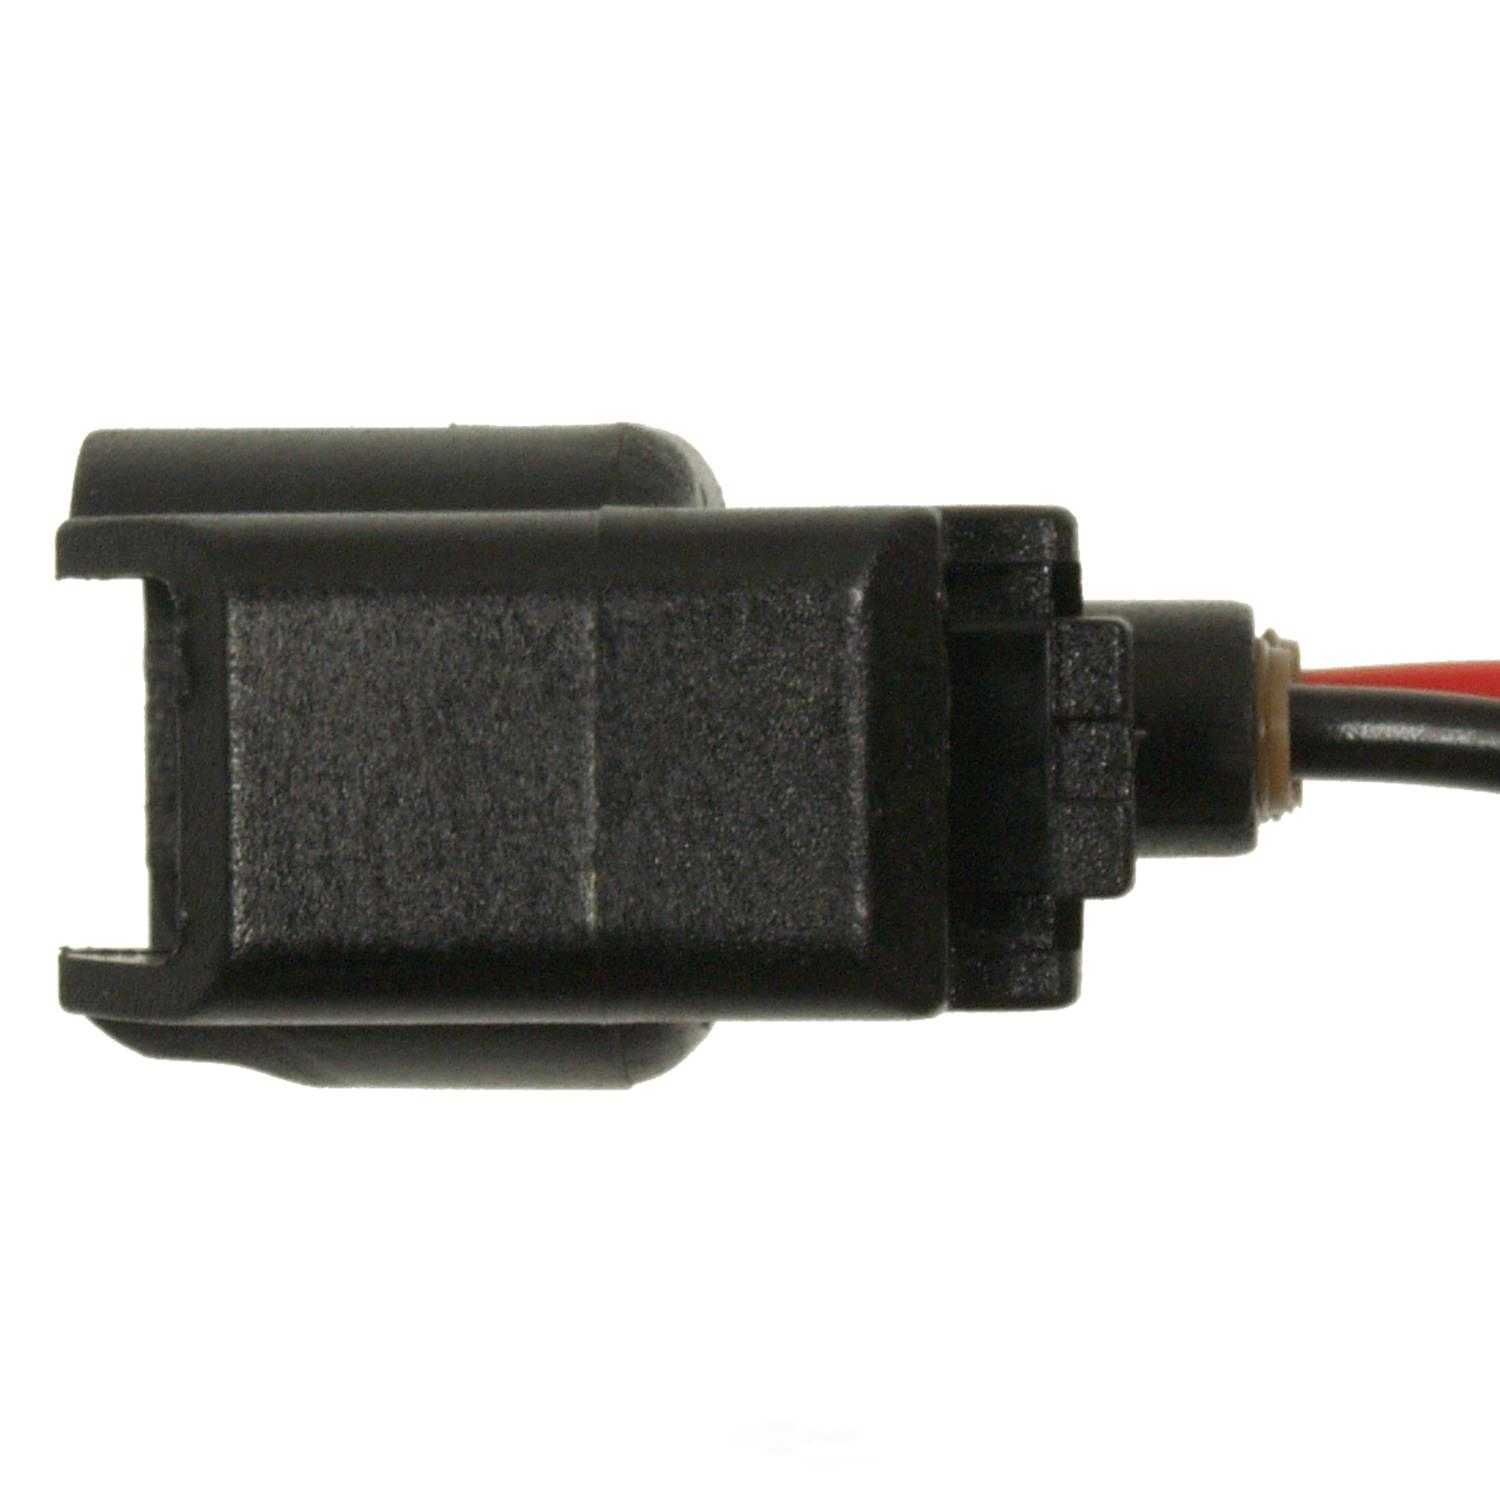 STANDARD MOTOR PRODUCTS - Electrical Pigtail - STA - s-824